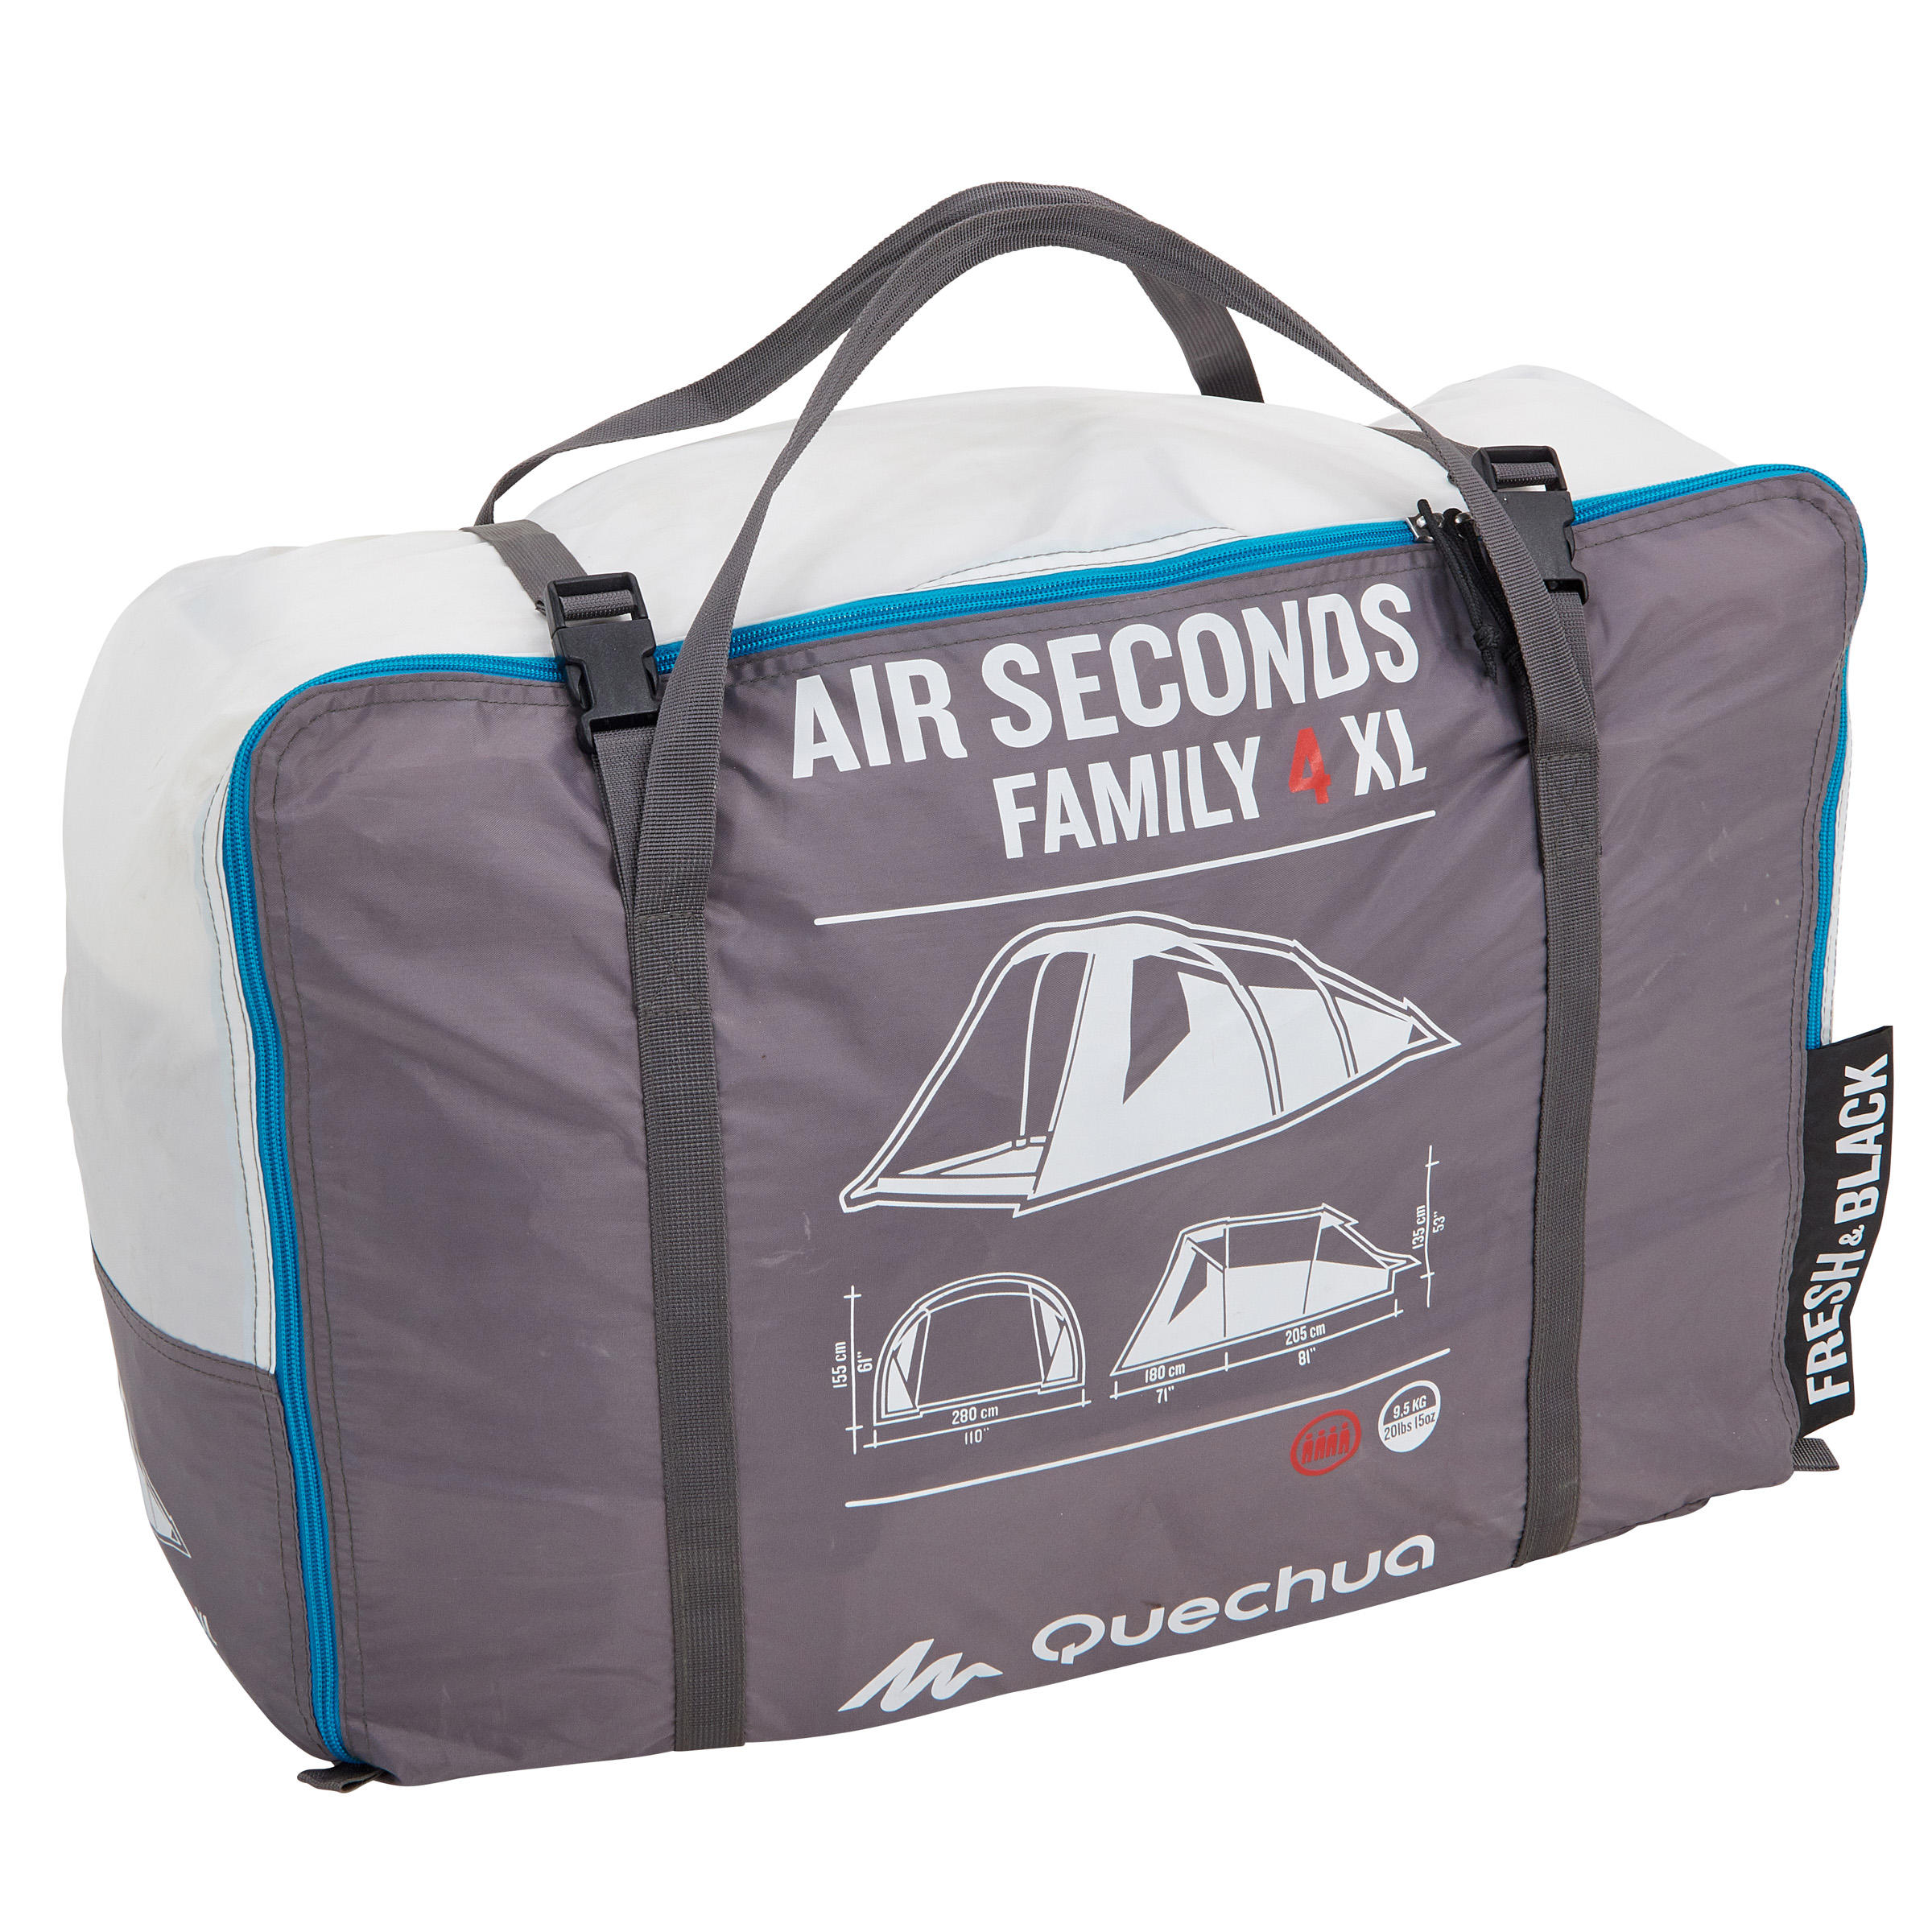 air seconds family 4xl